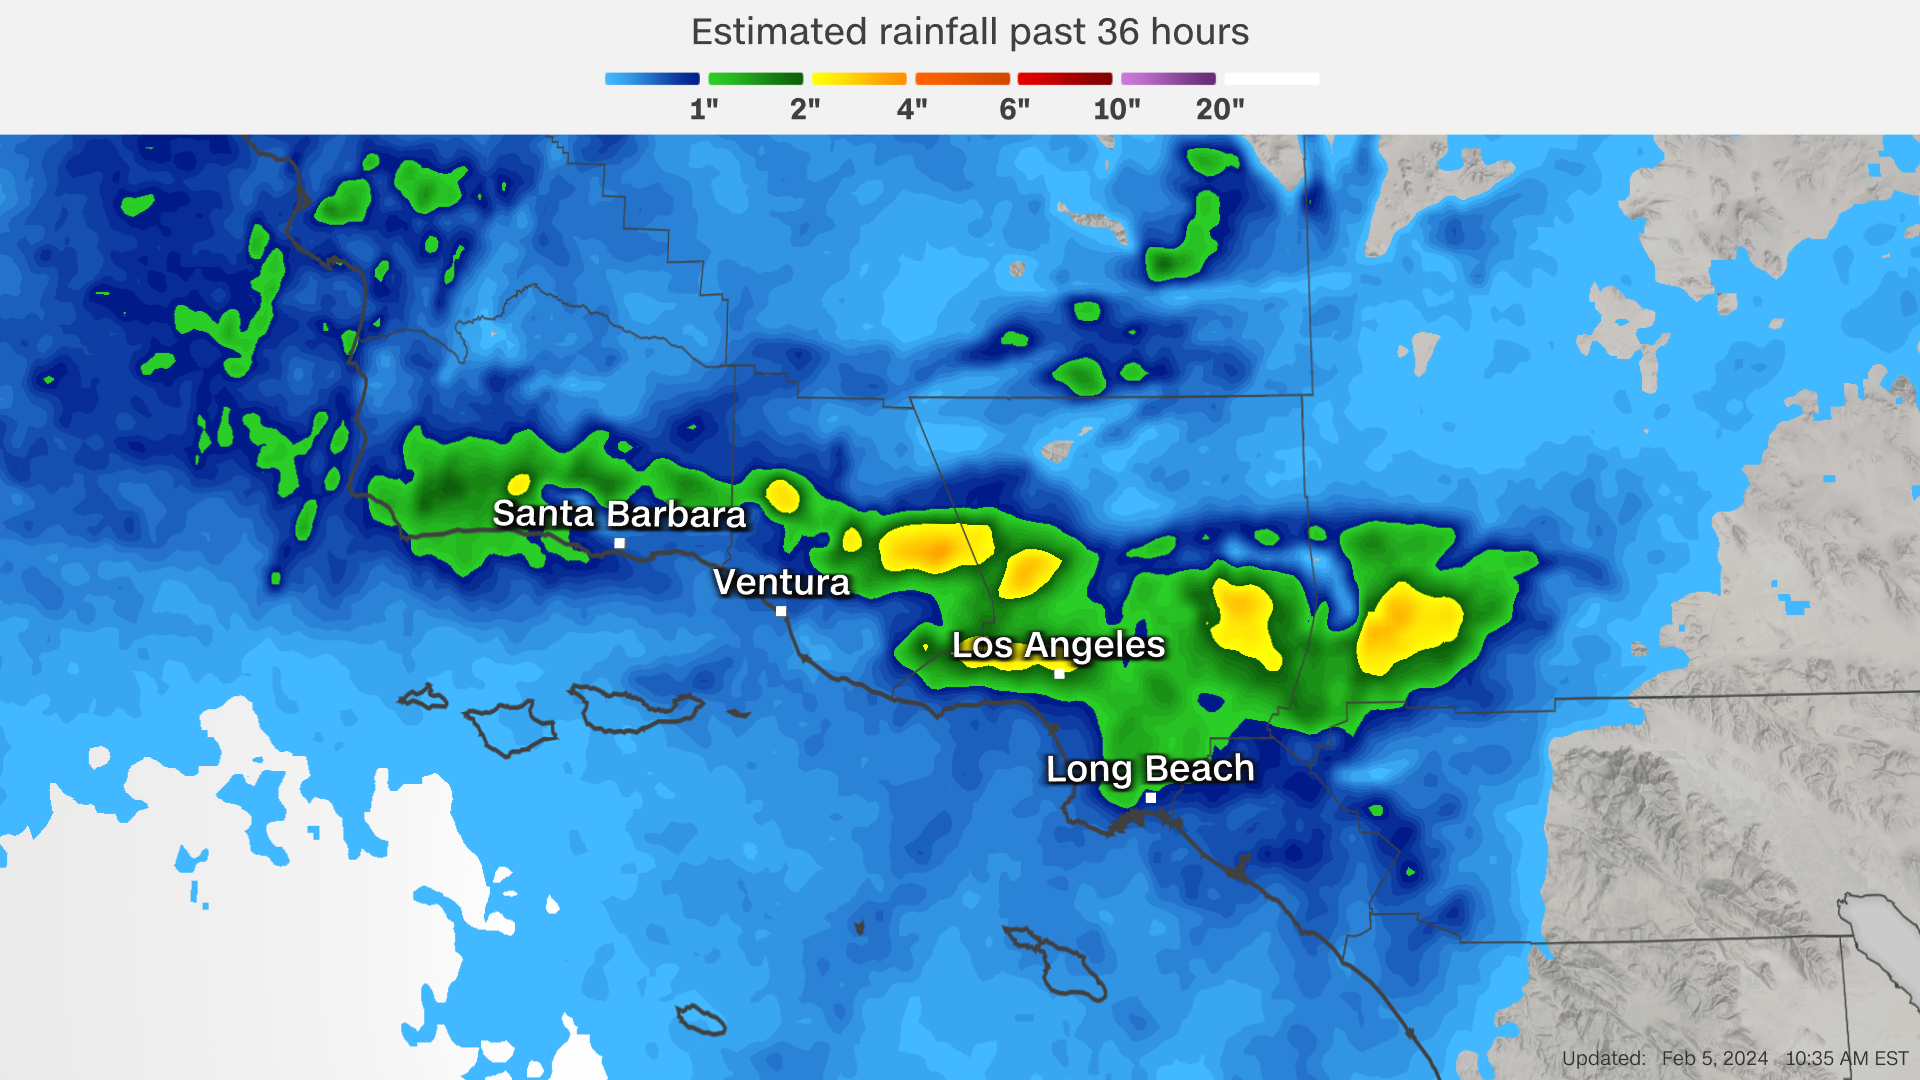 Radar estimated rainfall totals across Southern California as of 7:35 a.m. PT. 